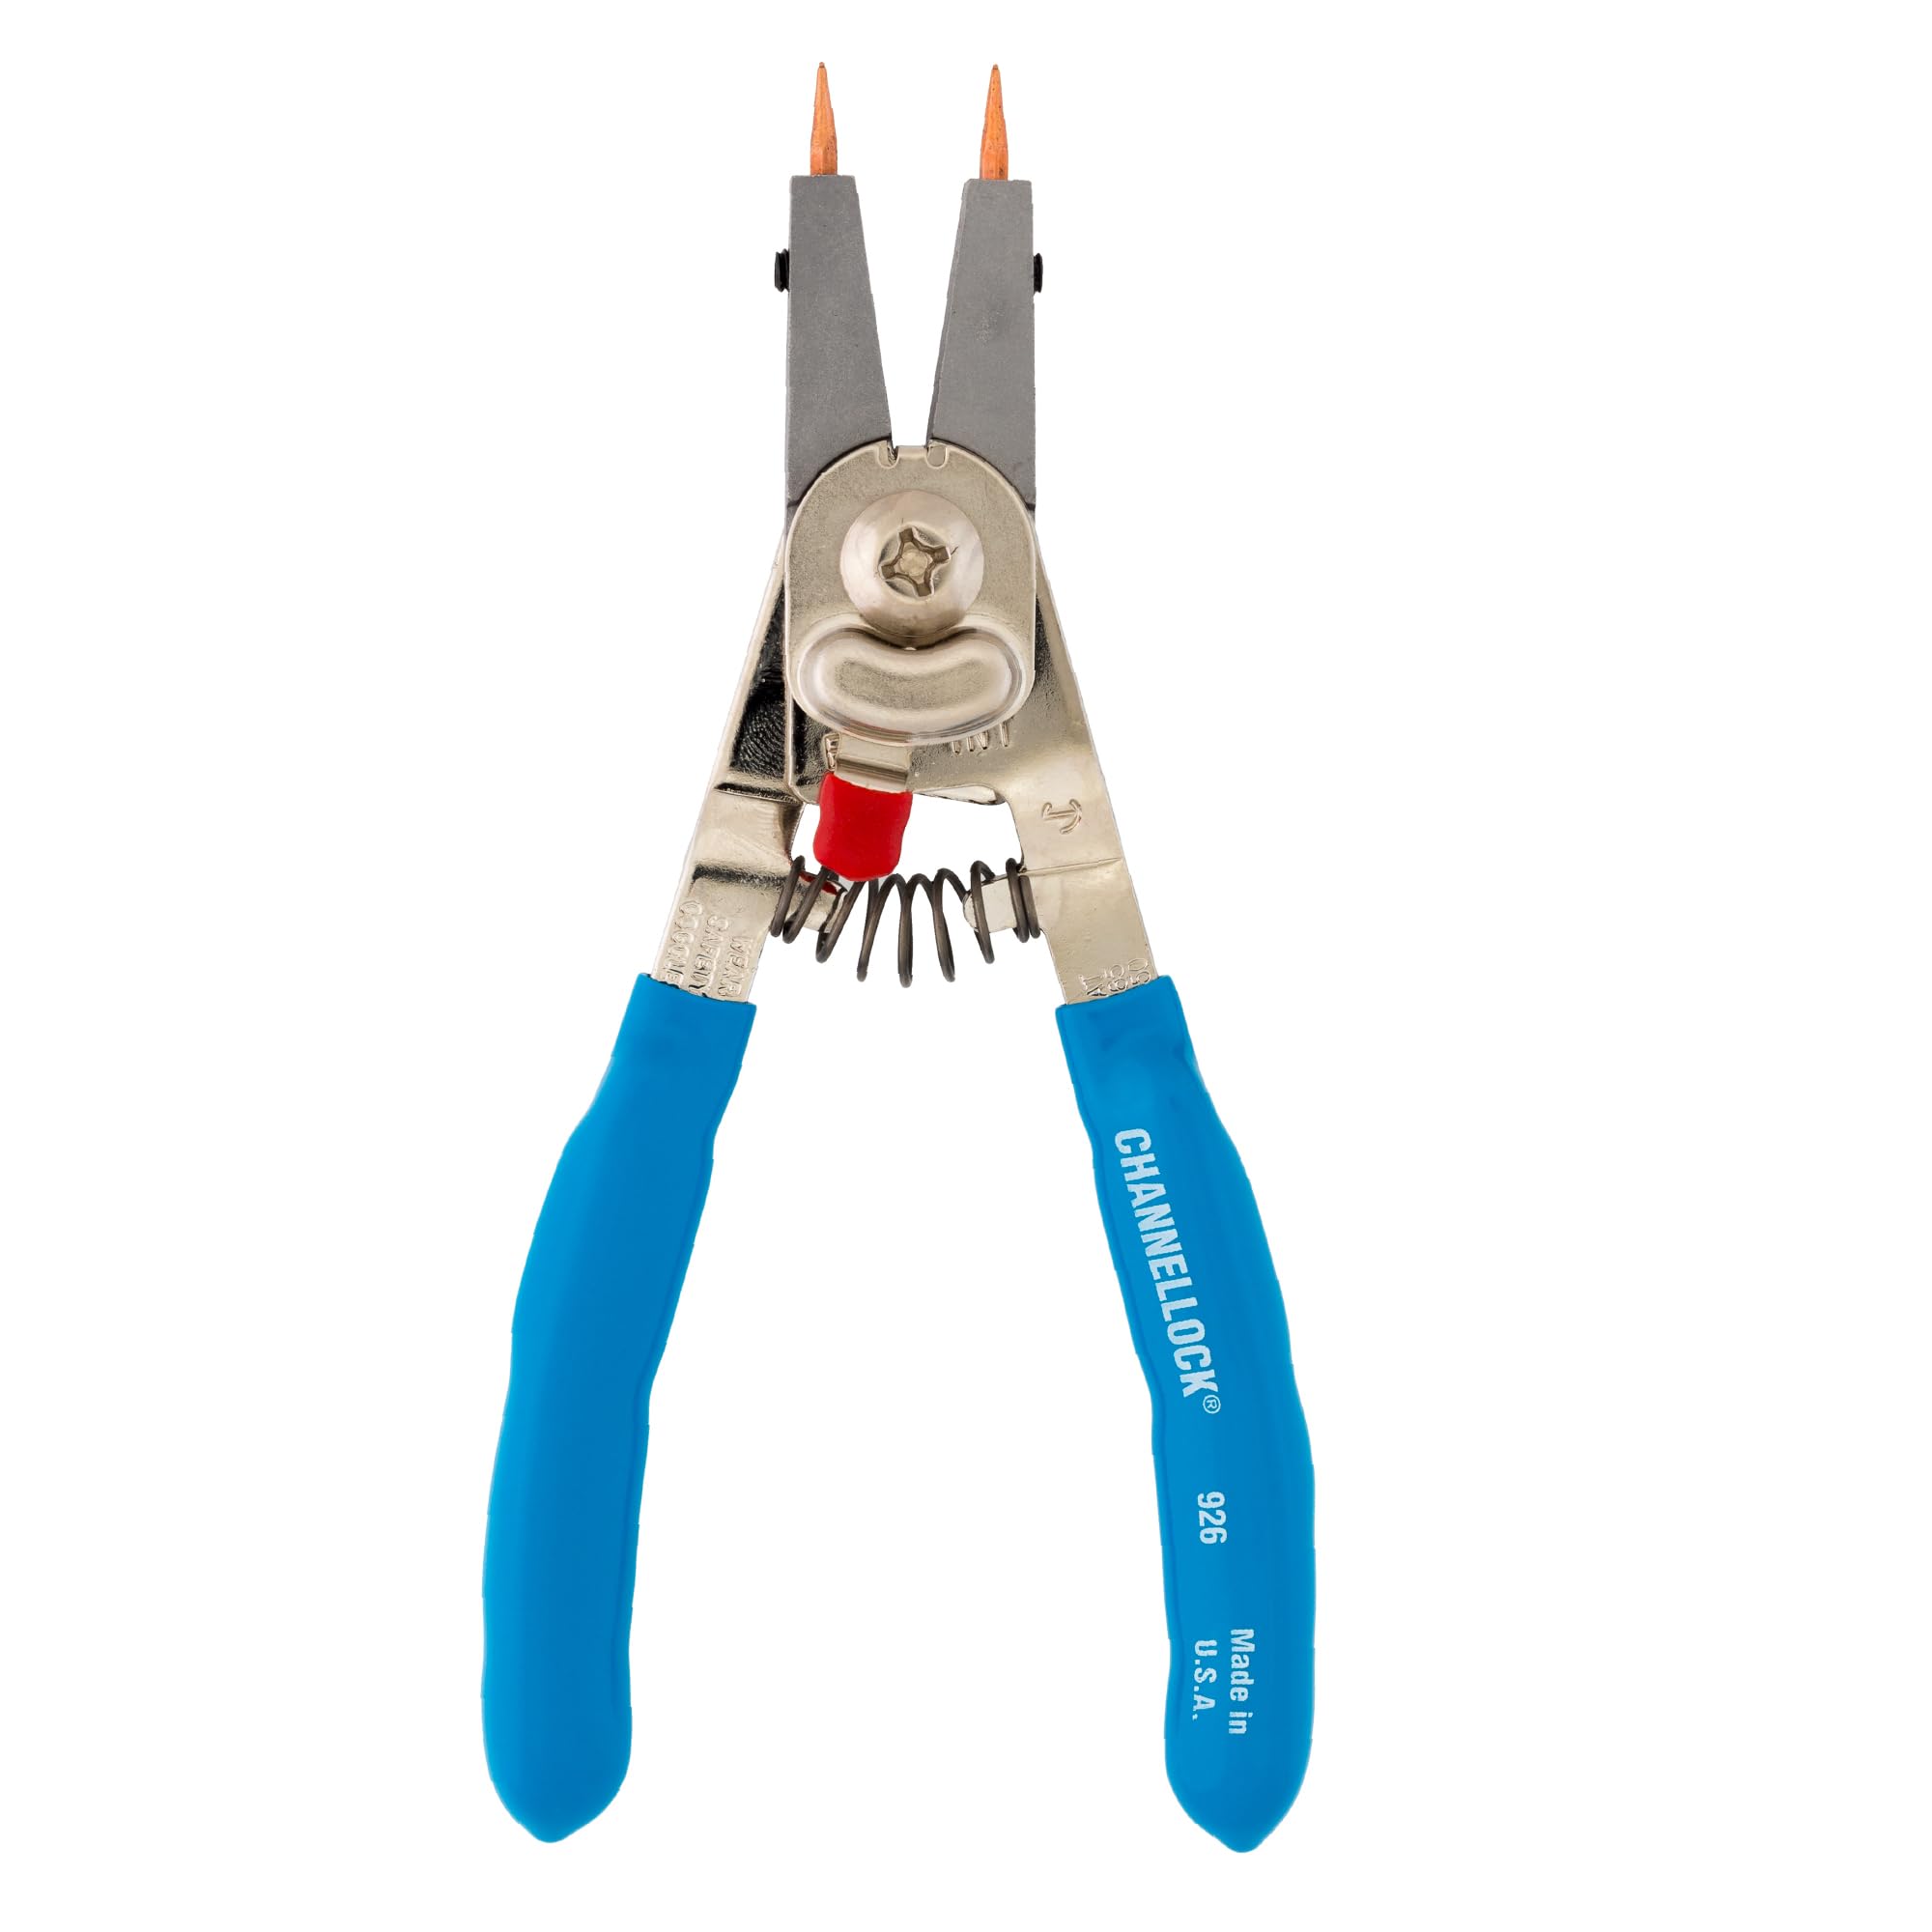 6.5" Channellock Retaining Ring Plier $14.89 + Free Shipping w/ Prime or on $35+